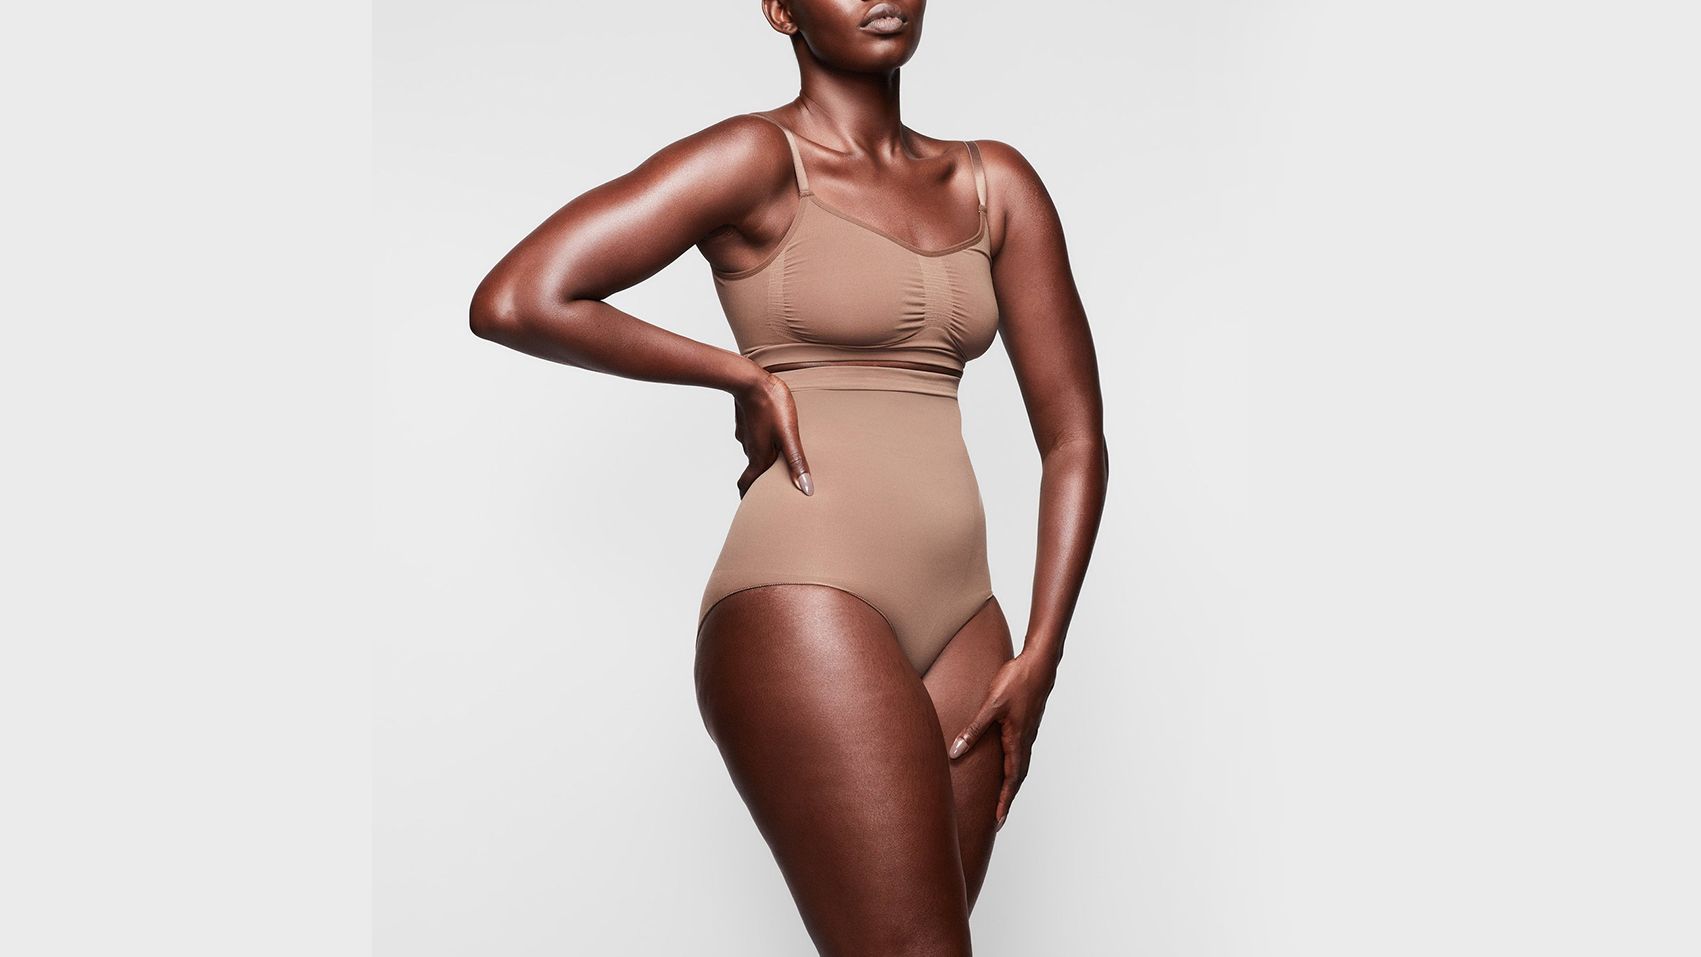 ICynosure: Experts Recommend Trying Shapewear As Under Clothes